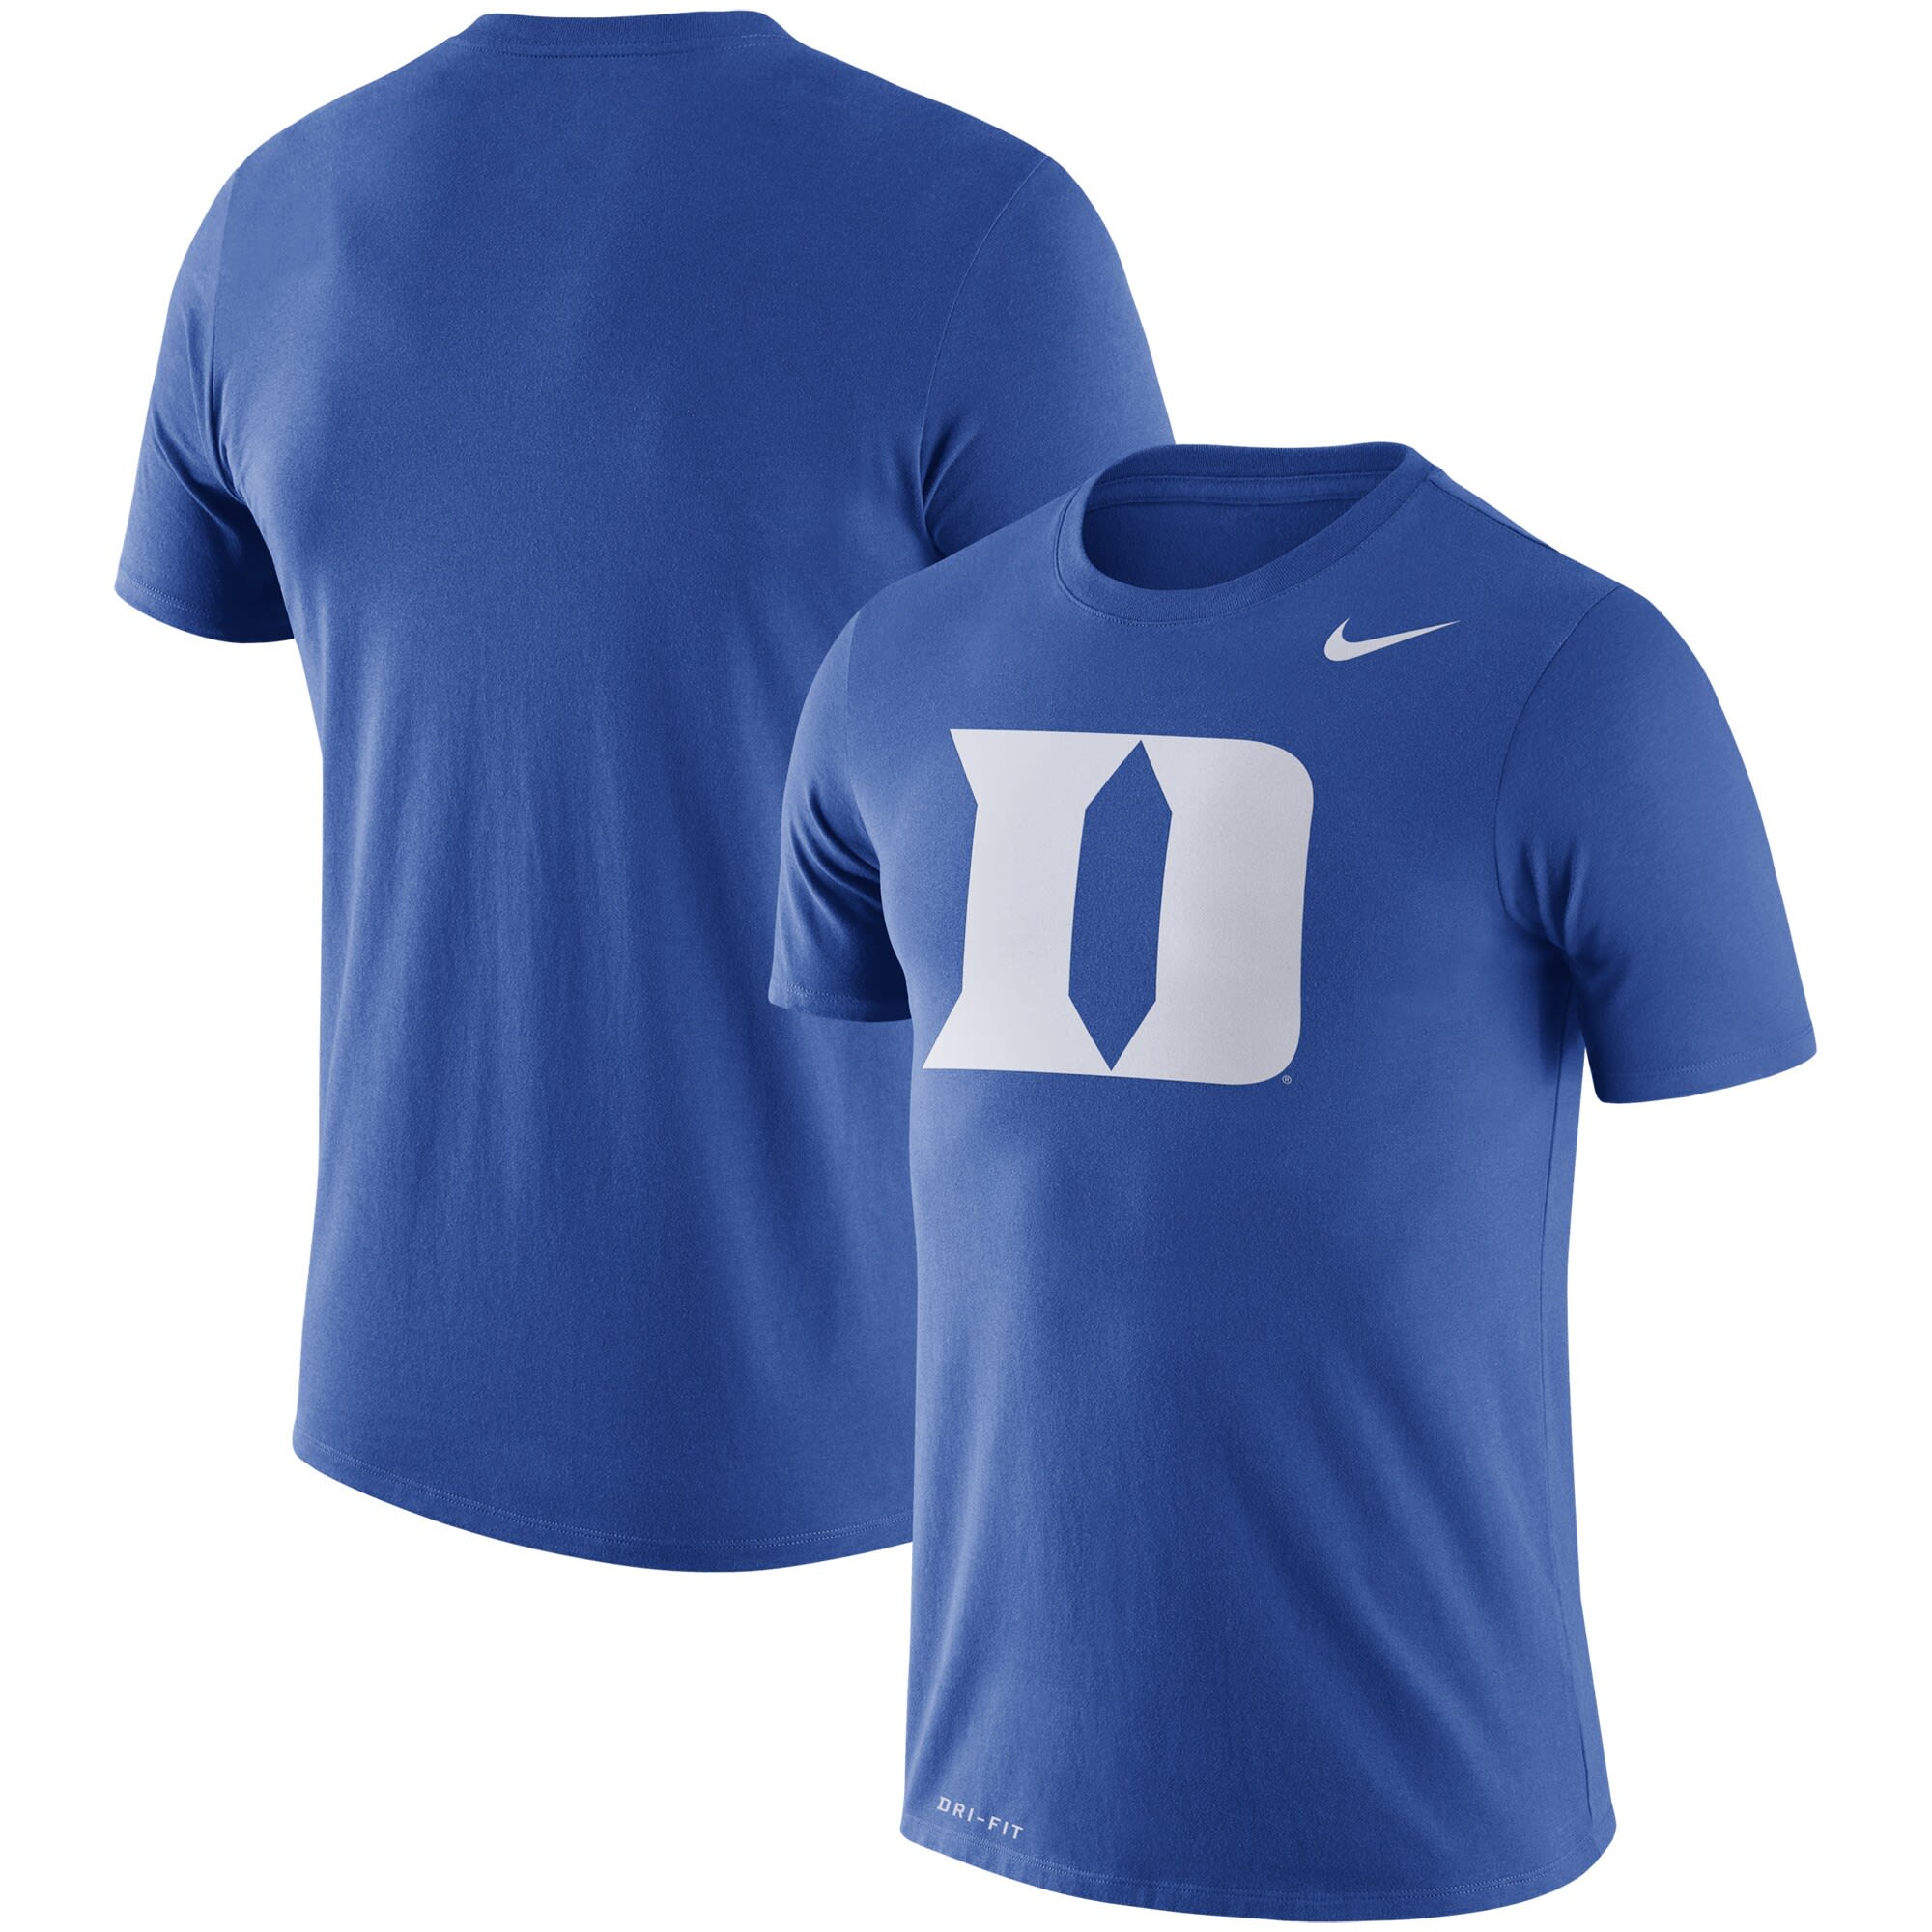 Father's Day gifts for the Duke Blue Devils fan